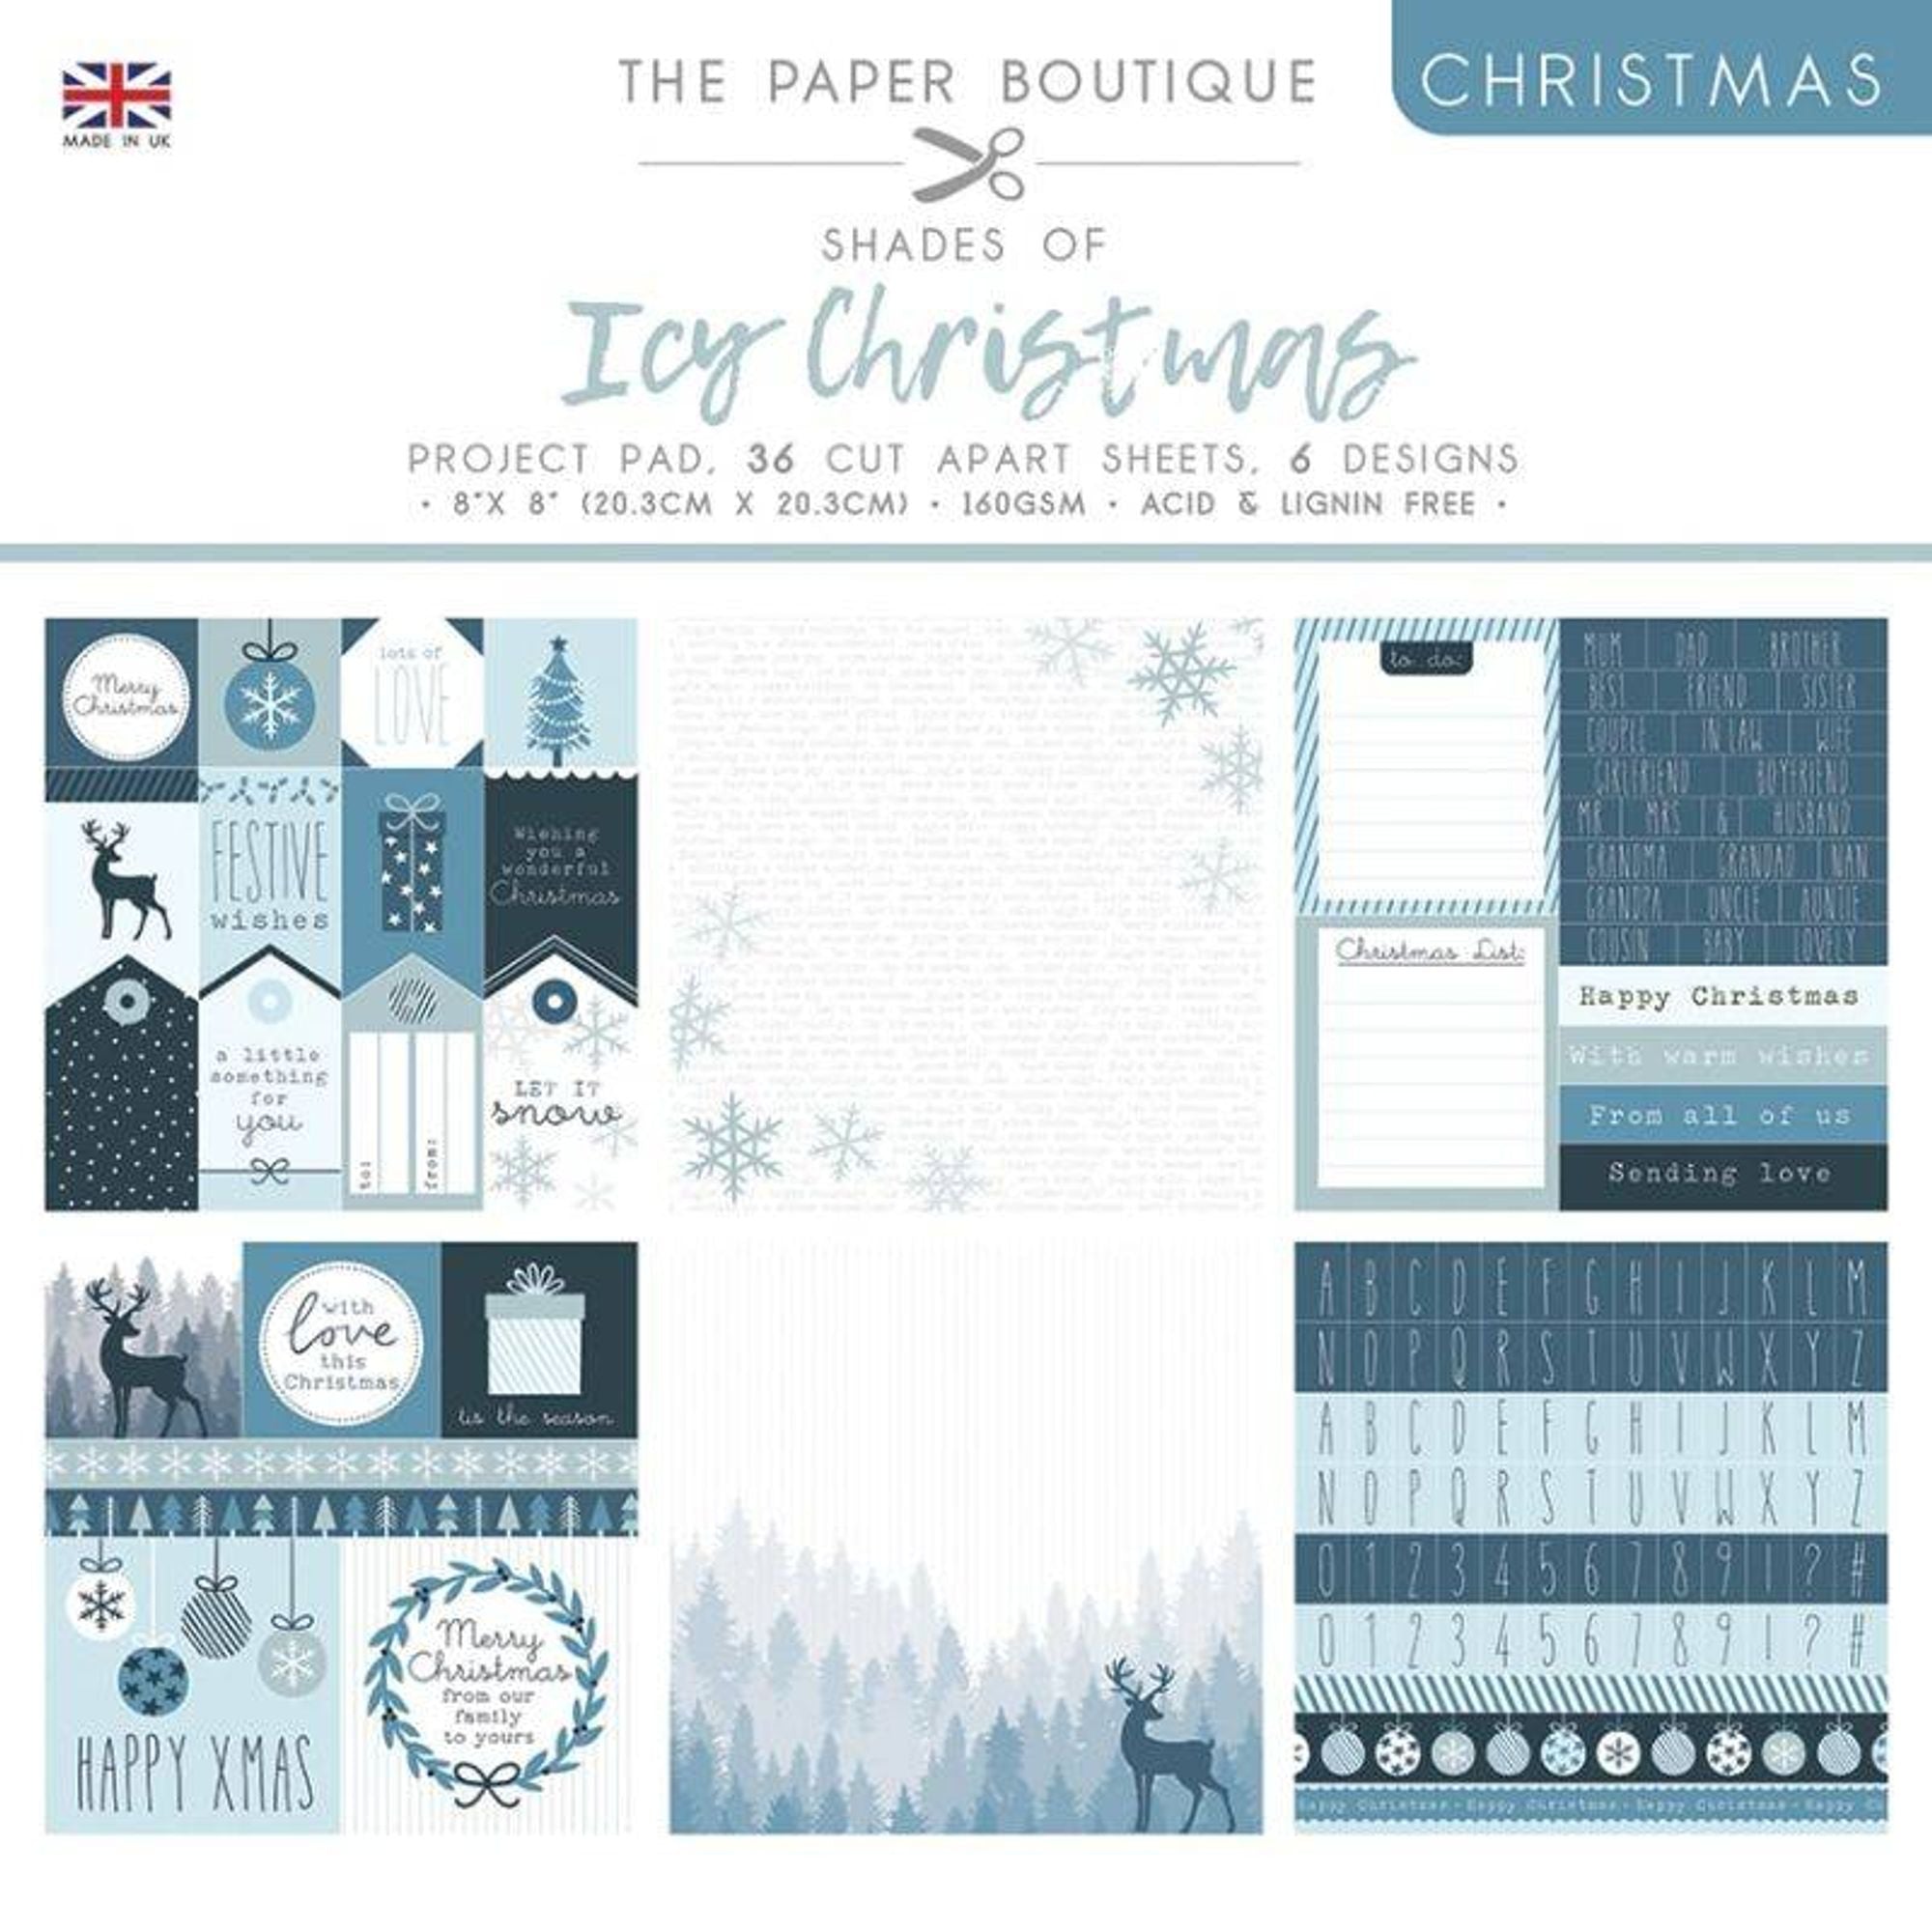 The Paper Boutique Christmas - Shades Of Icy Christmas 8 in x 8 in Project Pad